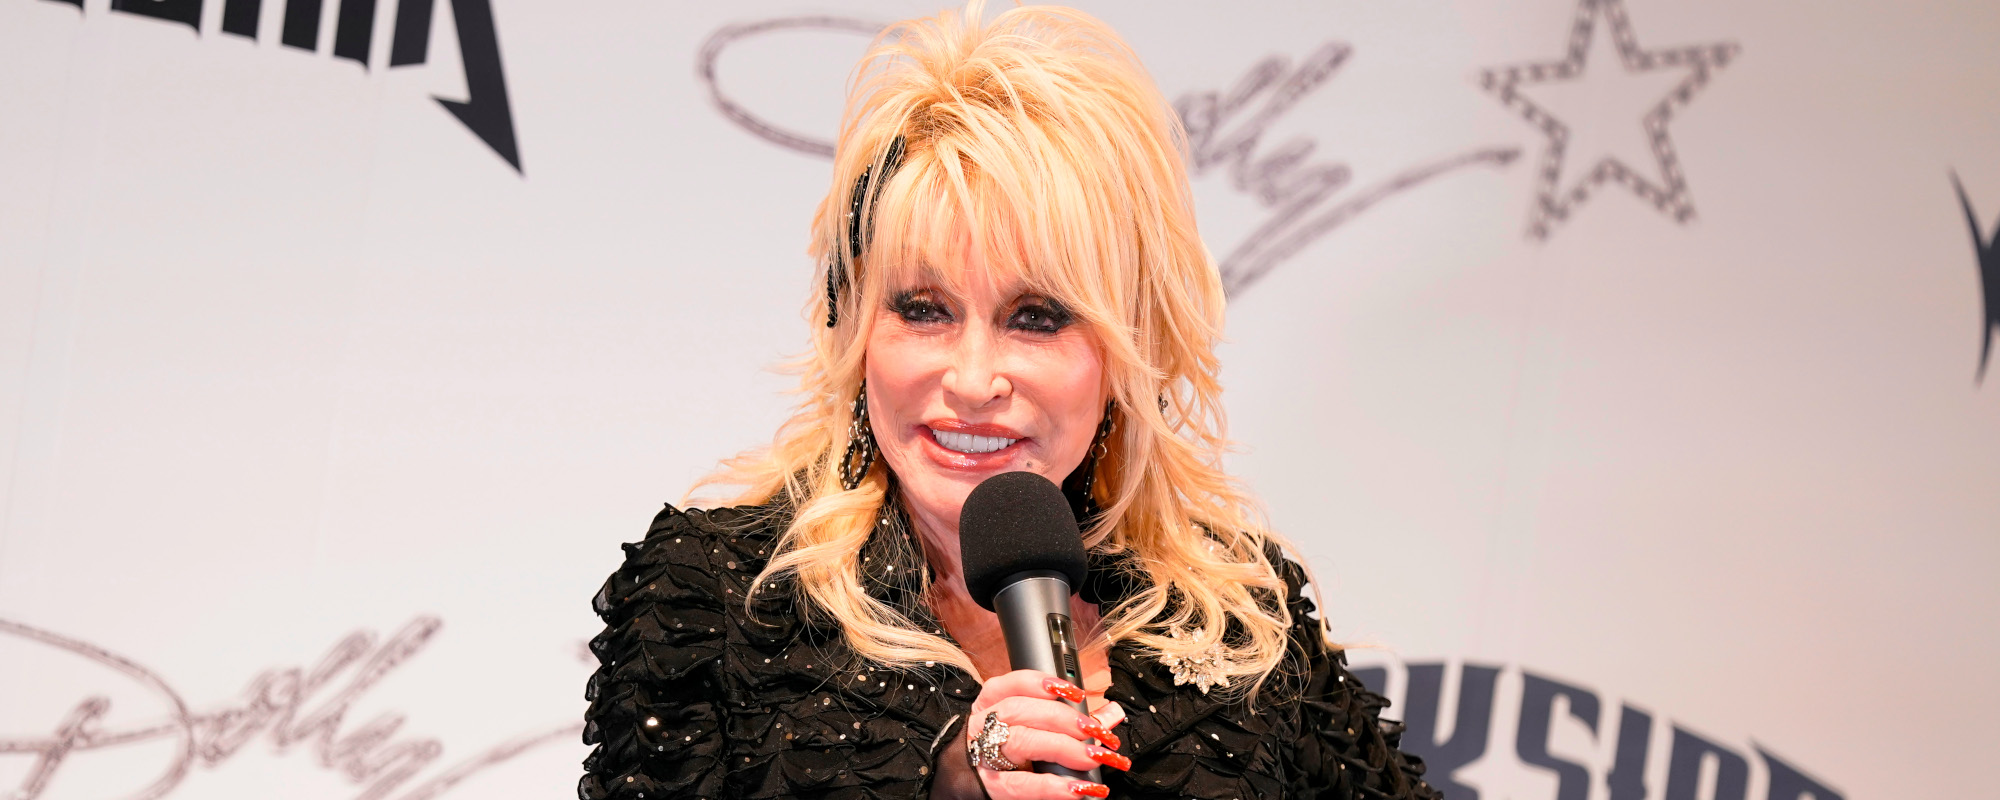 Dolly Parton’s Imagination Library Has Donated More Than 200 Million Books